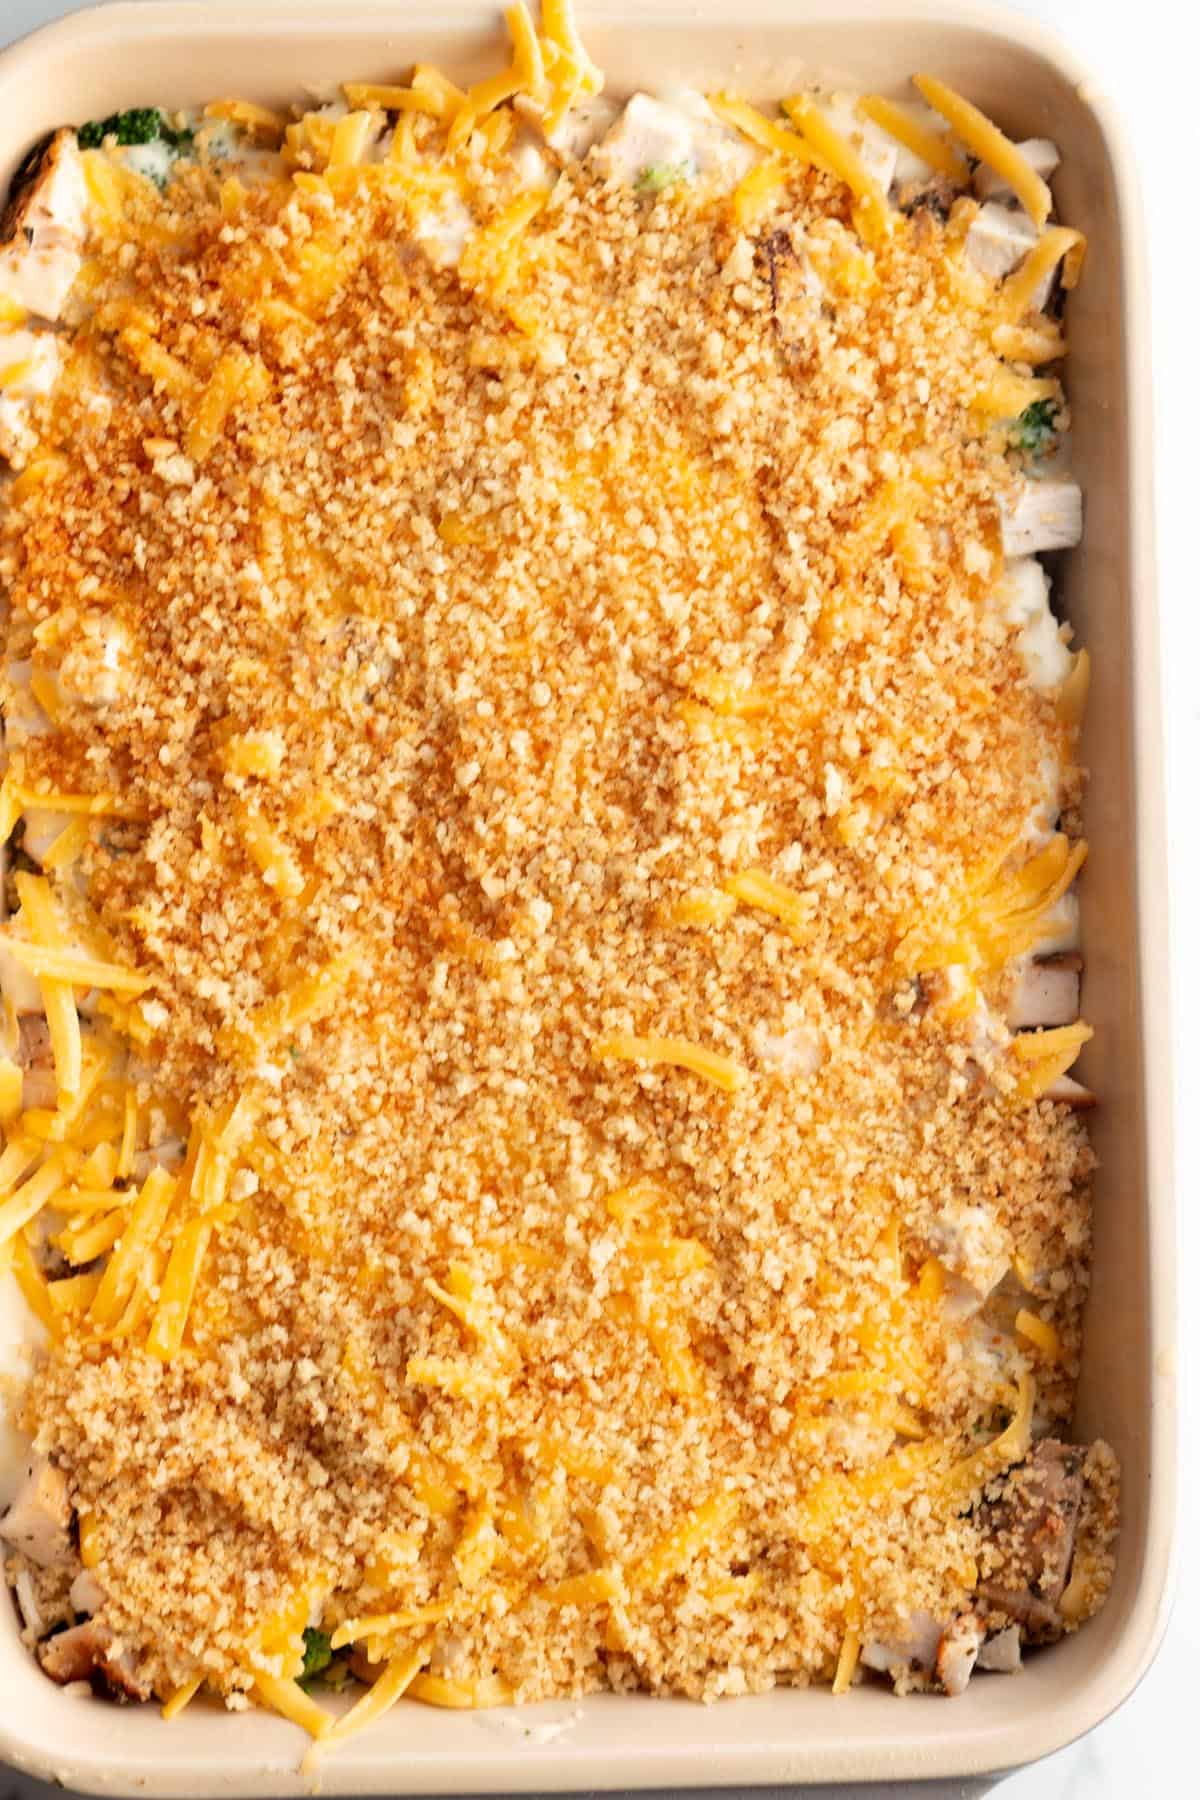 A casserole dish with a turkey divan topped with toasted panko crumbs.